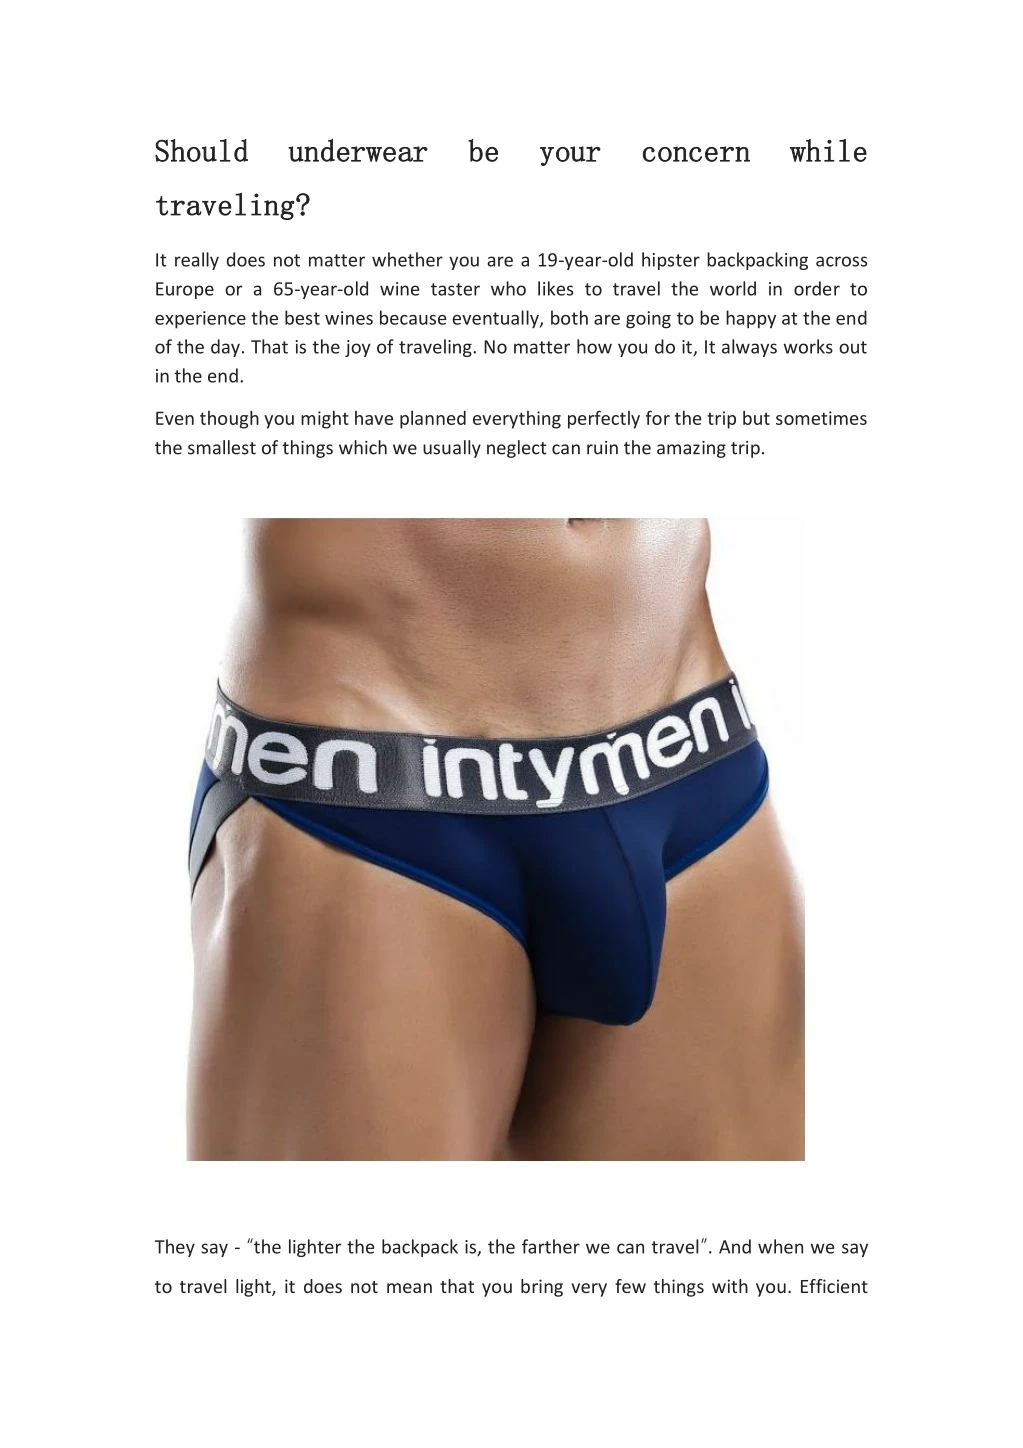 should should underwear be your concern while